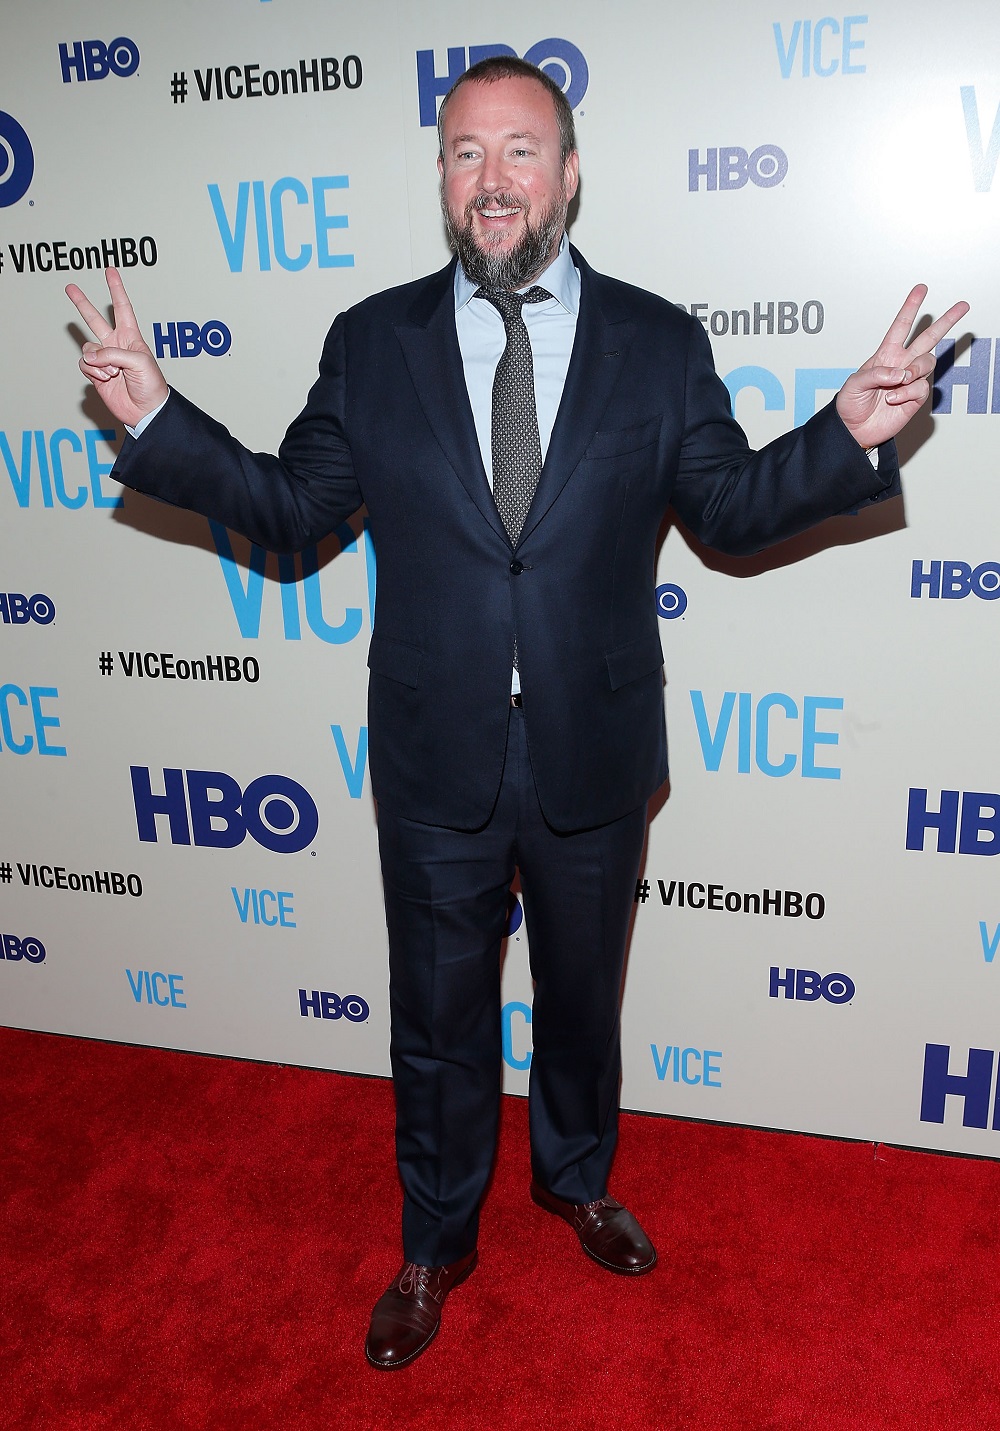 Shane Smith im Time Warner Center - New York am 2. April 2013.  [Photo: Jemal Countess/Getty Images]